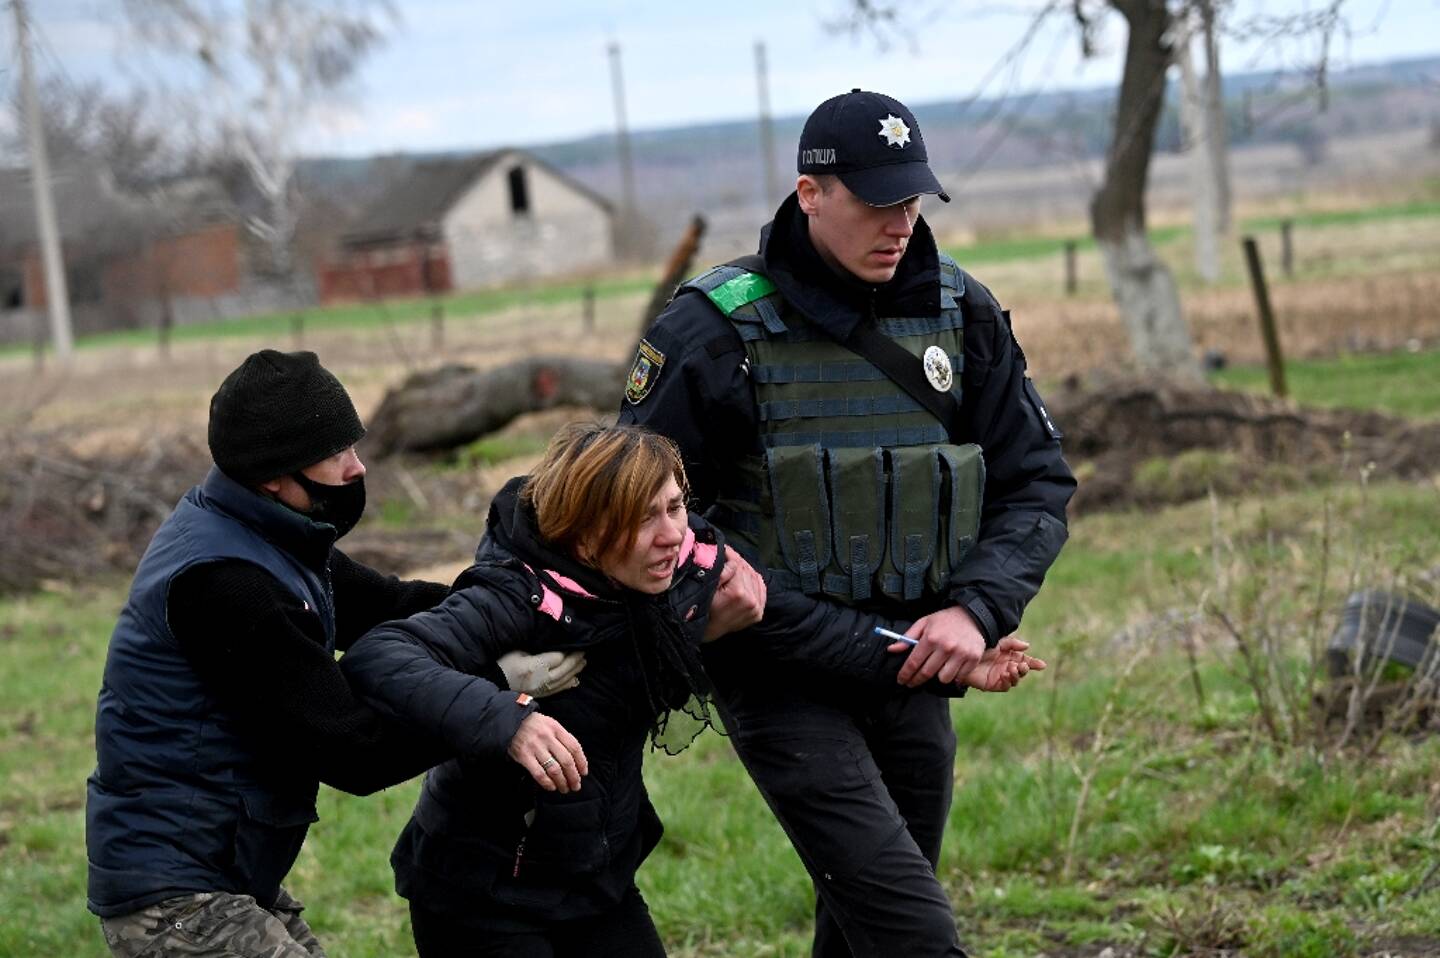 A woman supported by police during the exhumation of the body of her slain husband in Andriïvka, near Kyiv, on April 11, 2022 in Ukraine.